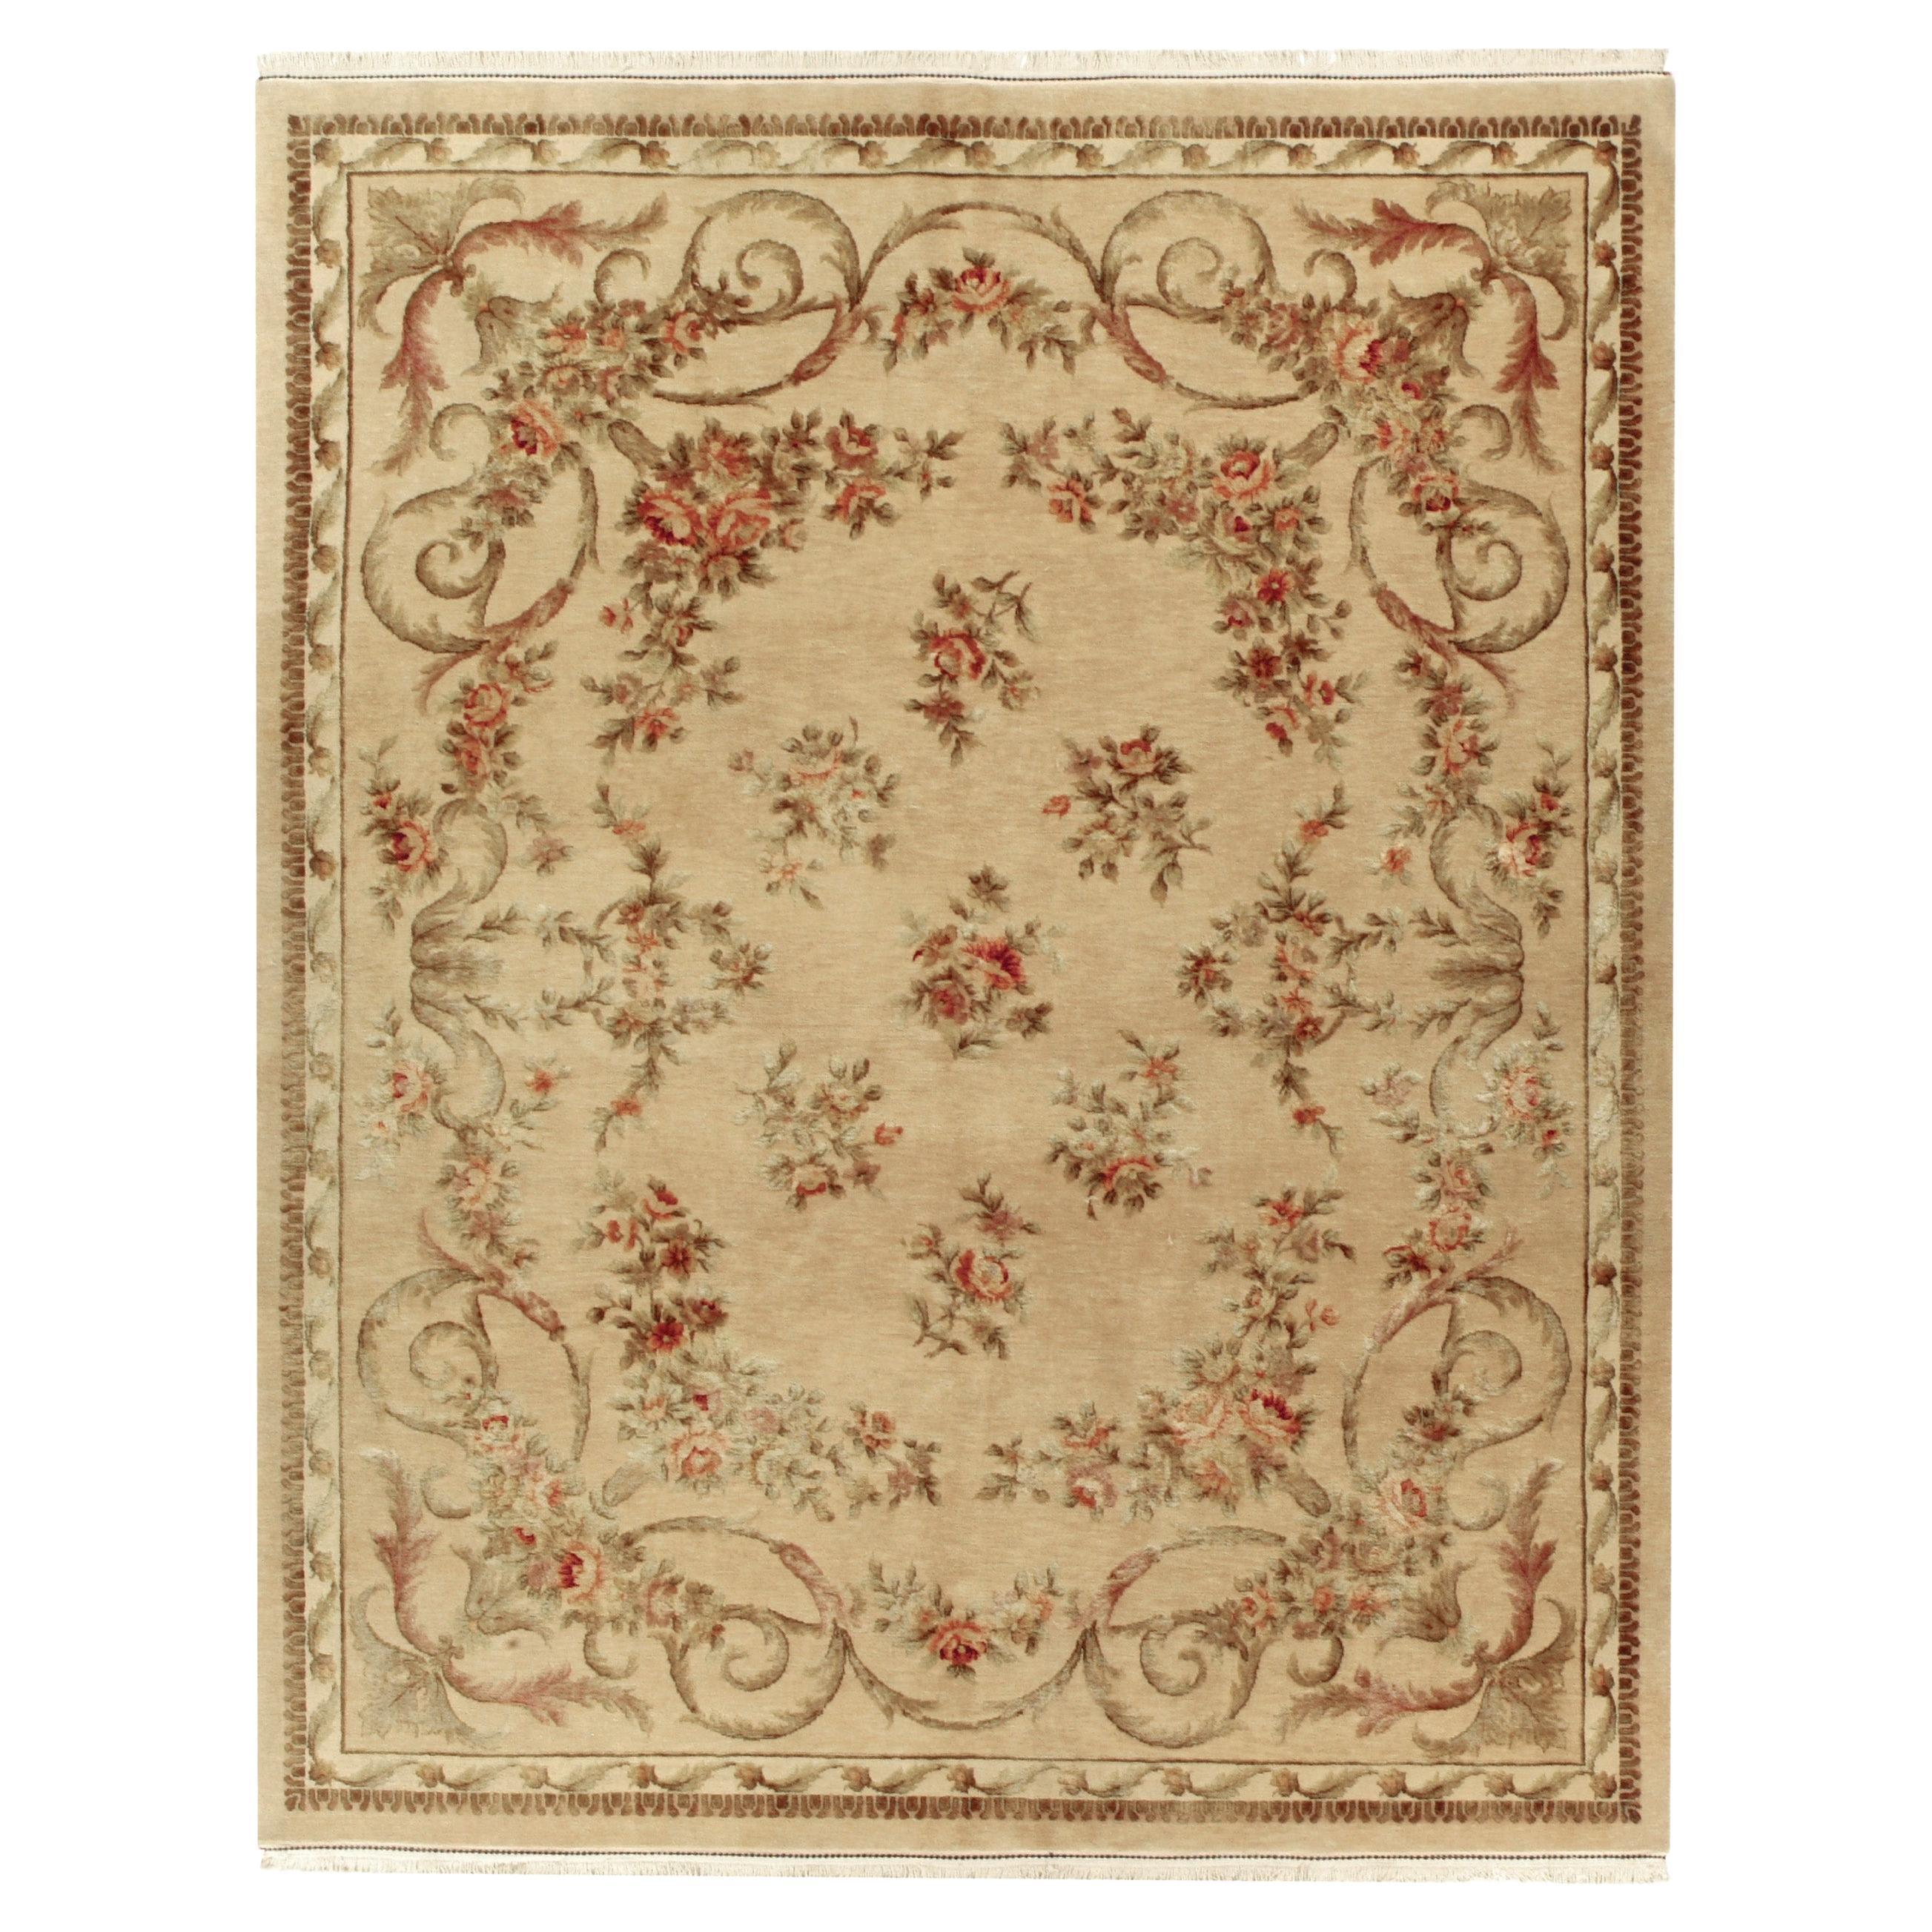 Luxury European Hand-Knotted Shenandoah Birch 10x14 Rug For Sale